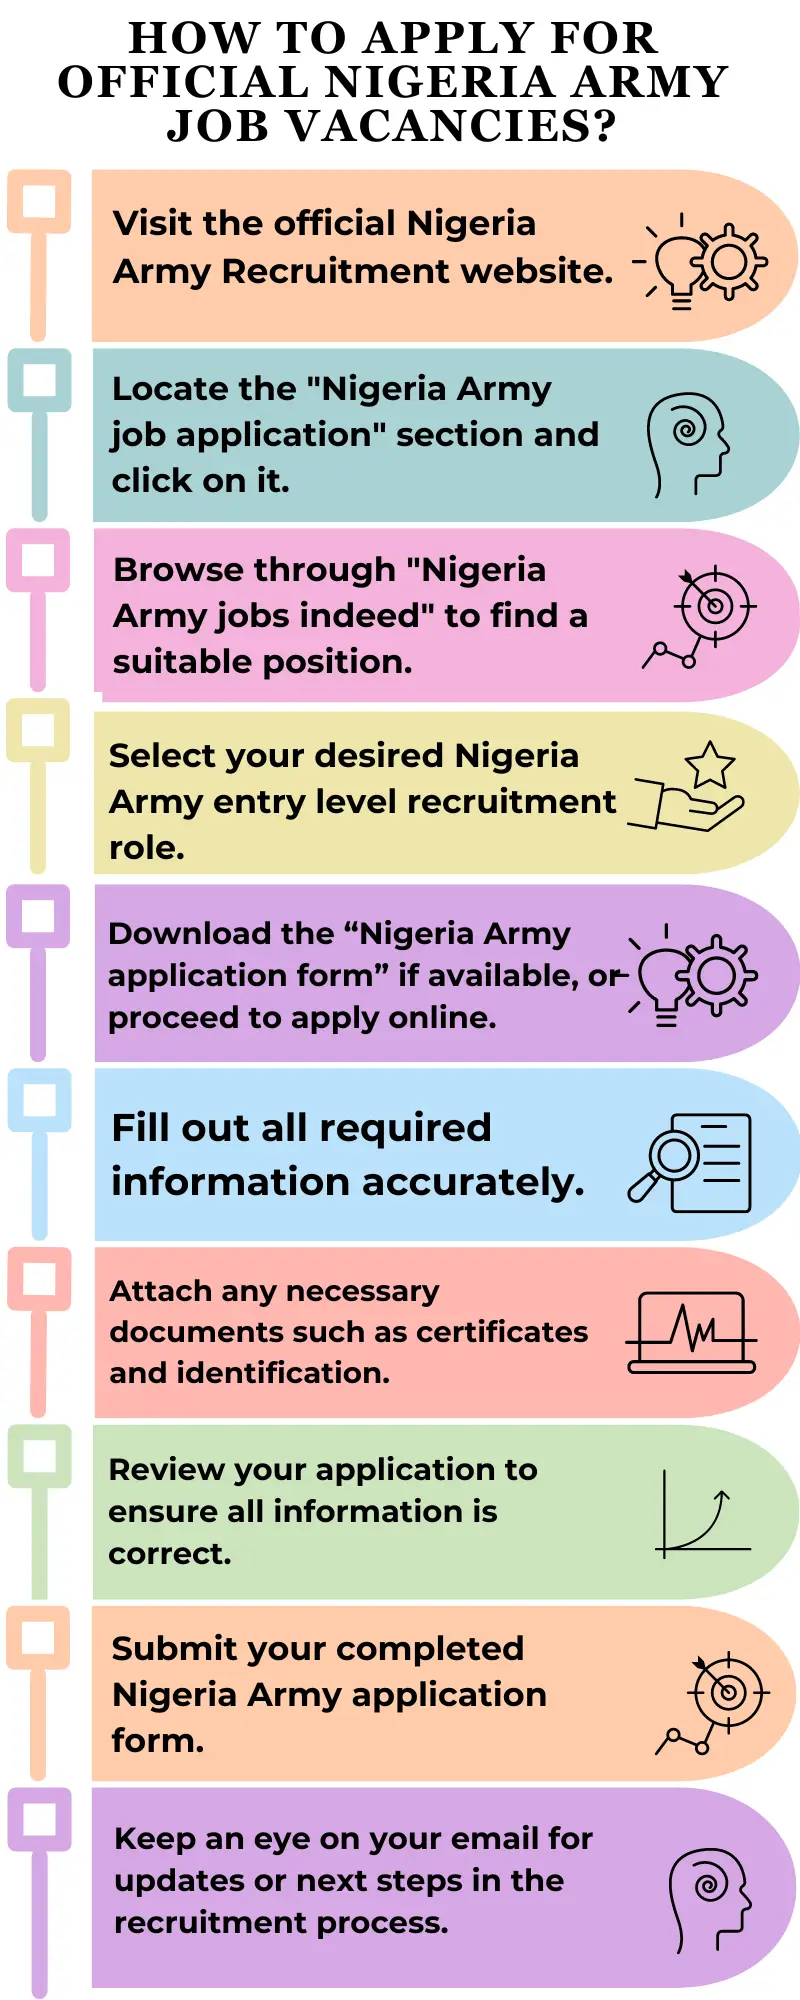 How to Apply for Official Nigeria Army Job Vacancies?